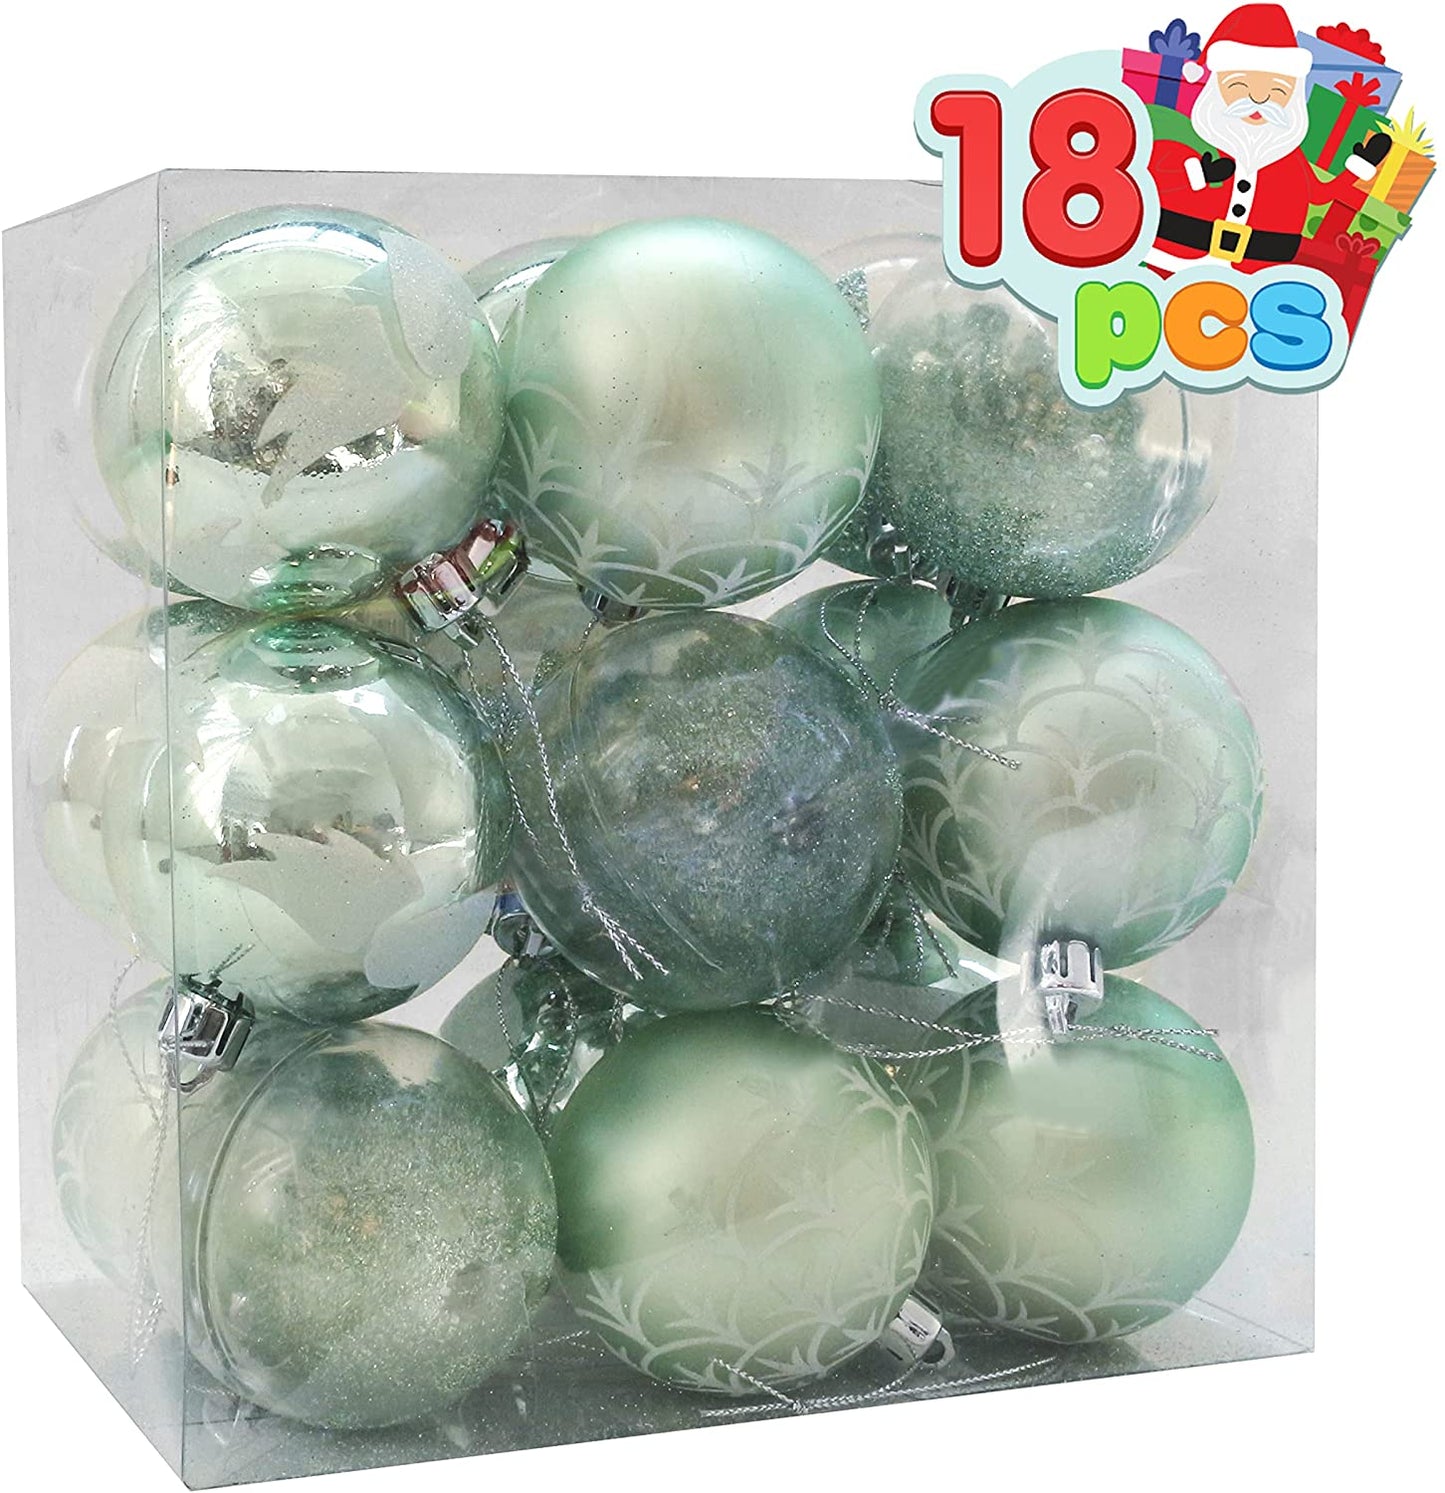 18 Pcs 6CM Christmas Ornaments with Gradient Teal